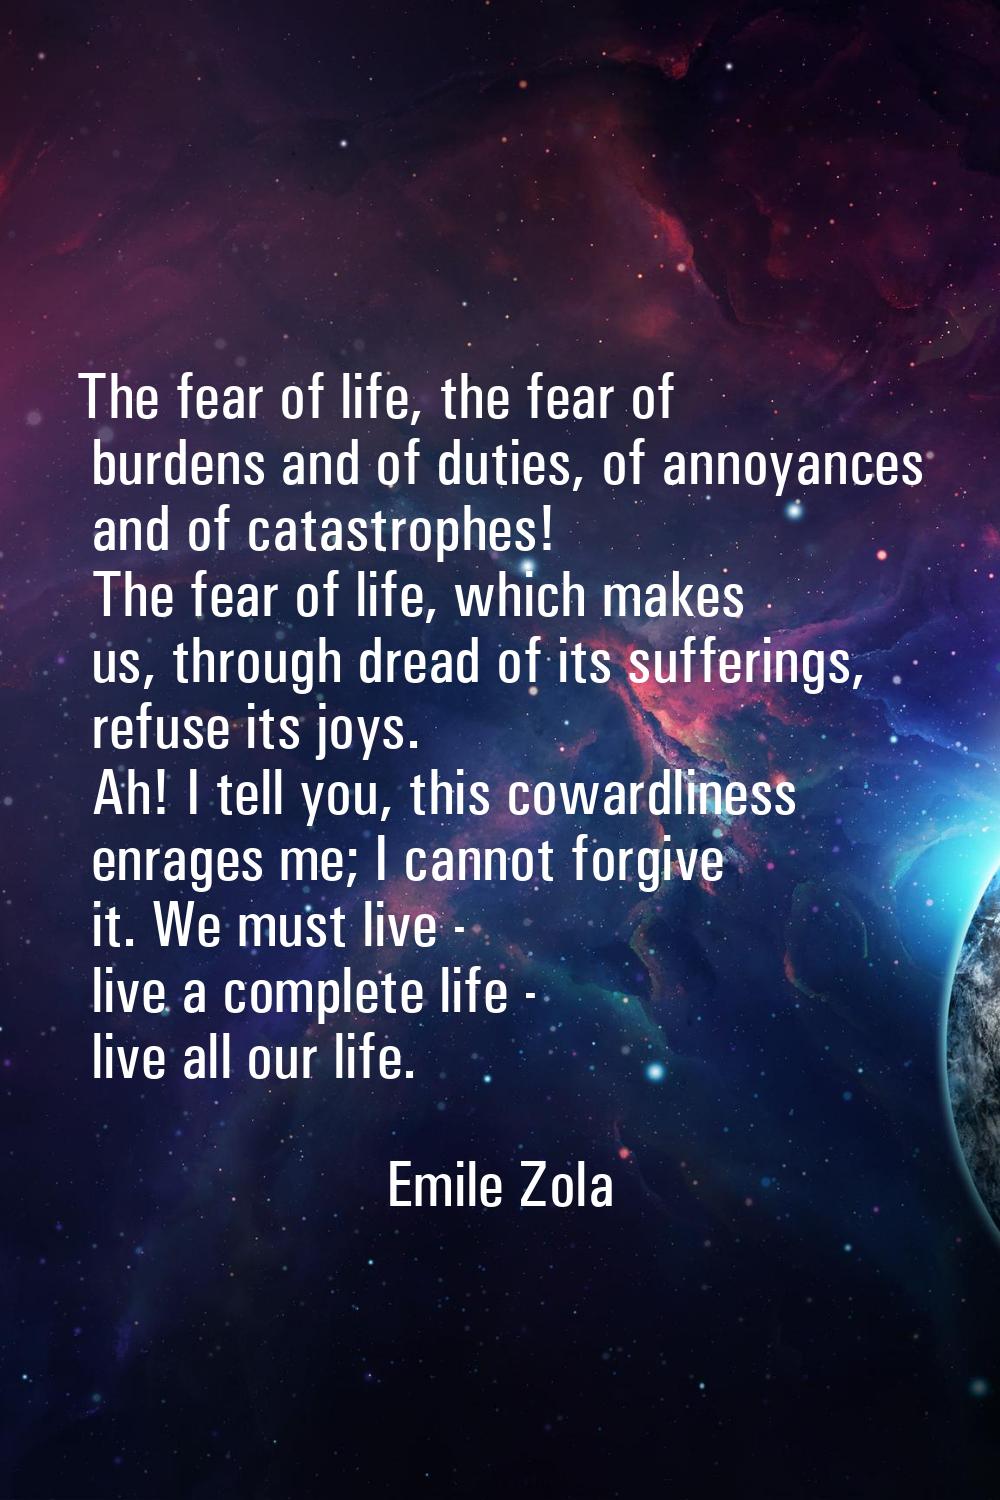 The fear of life, the fear of burdens and of duties, of annoyances and of catastrophes! The fear of